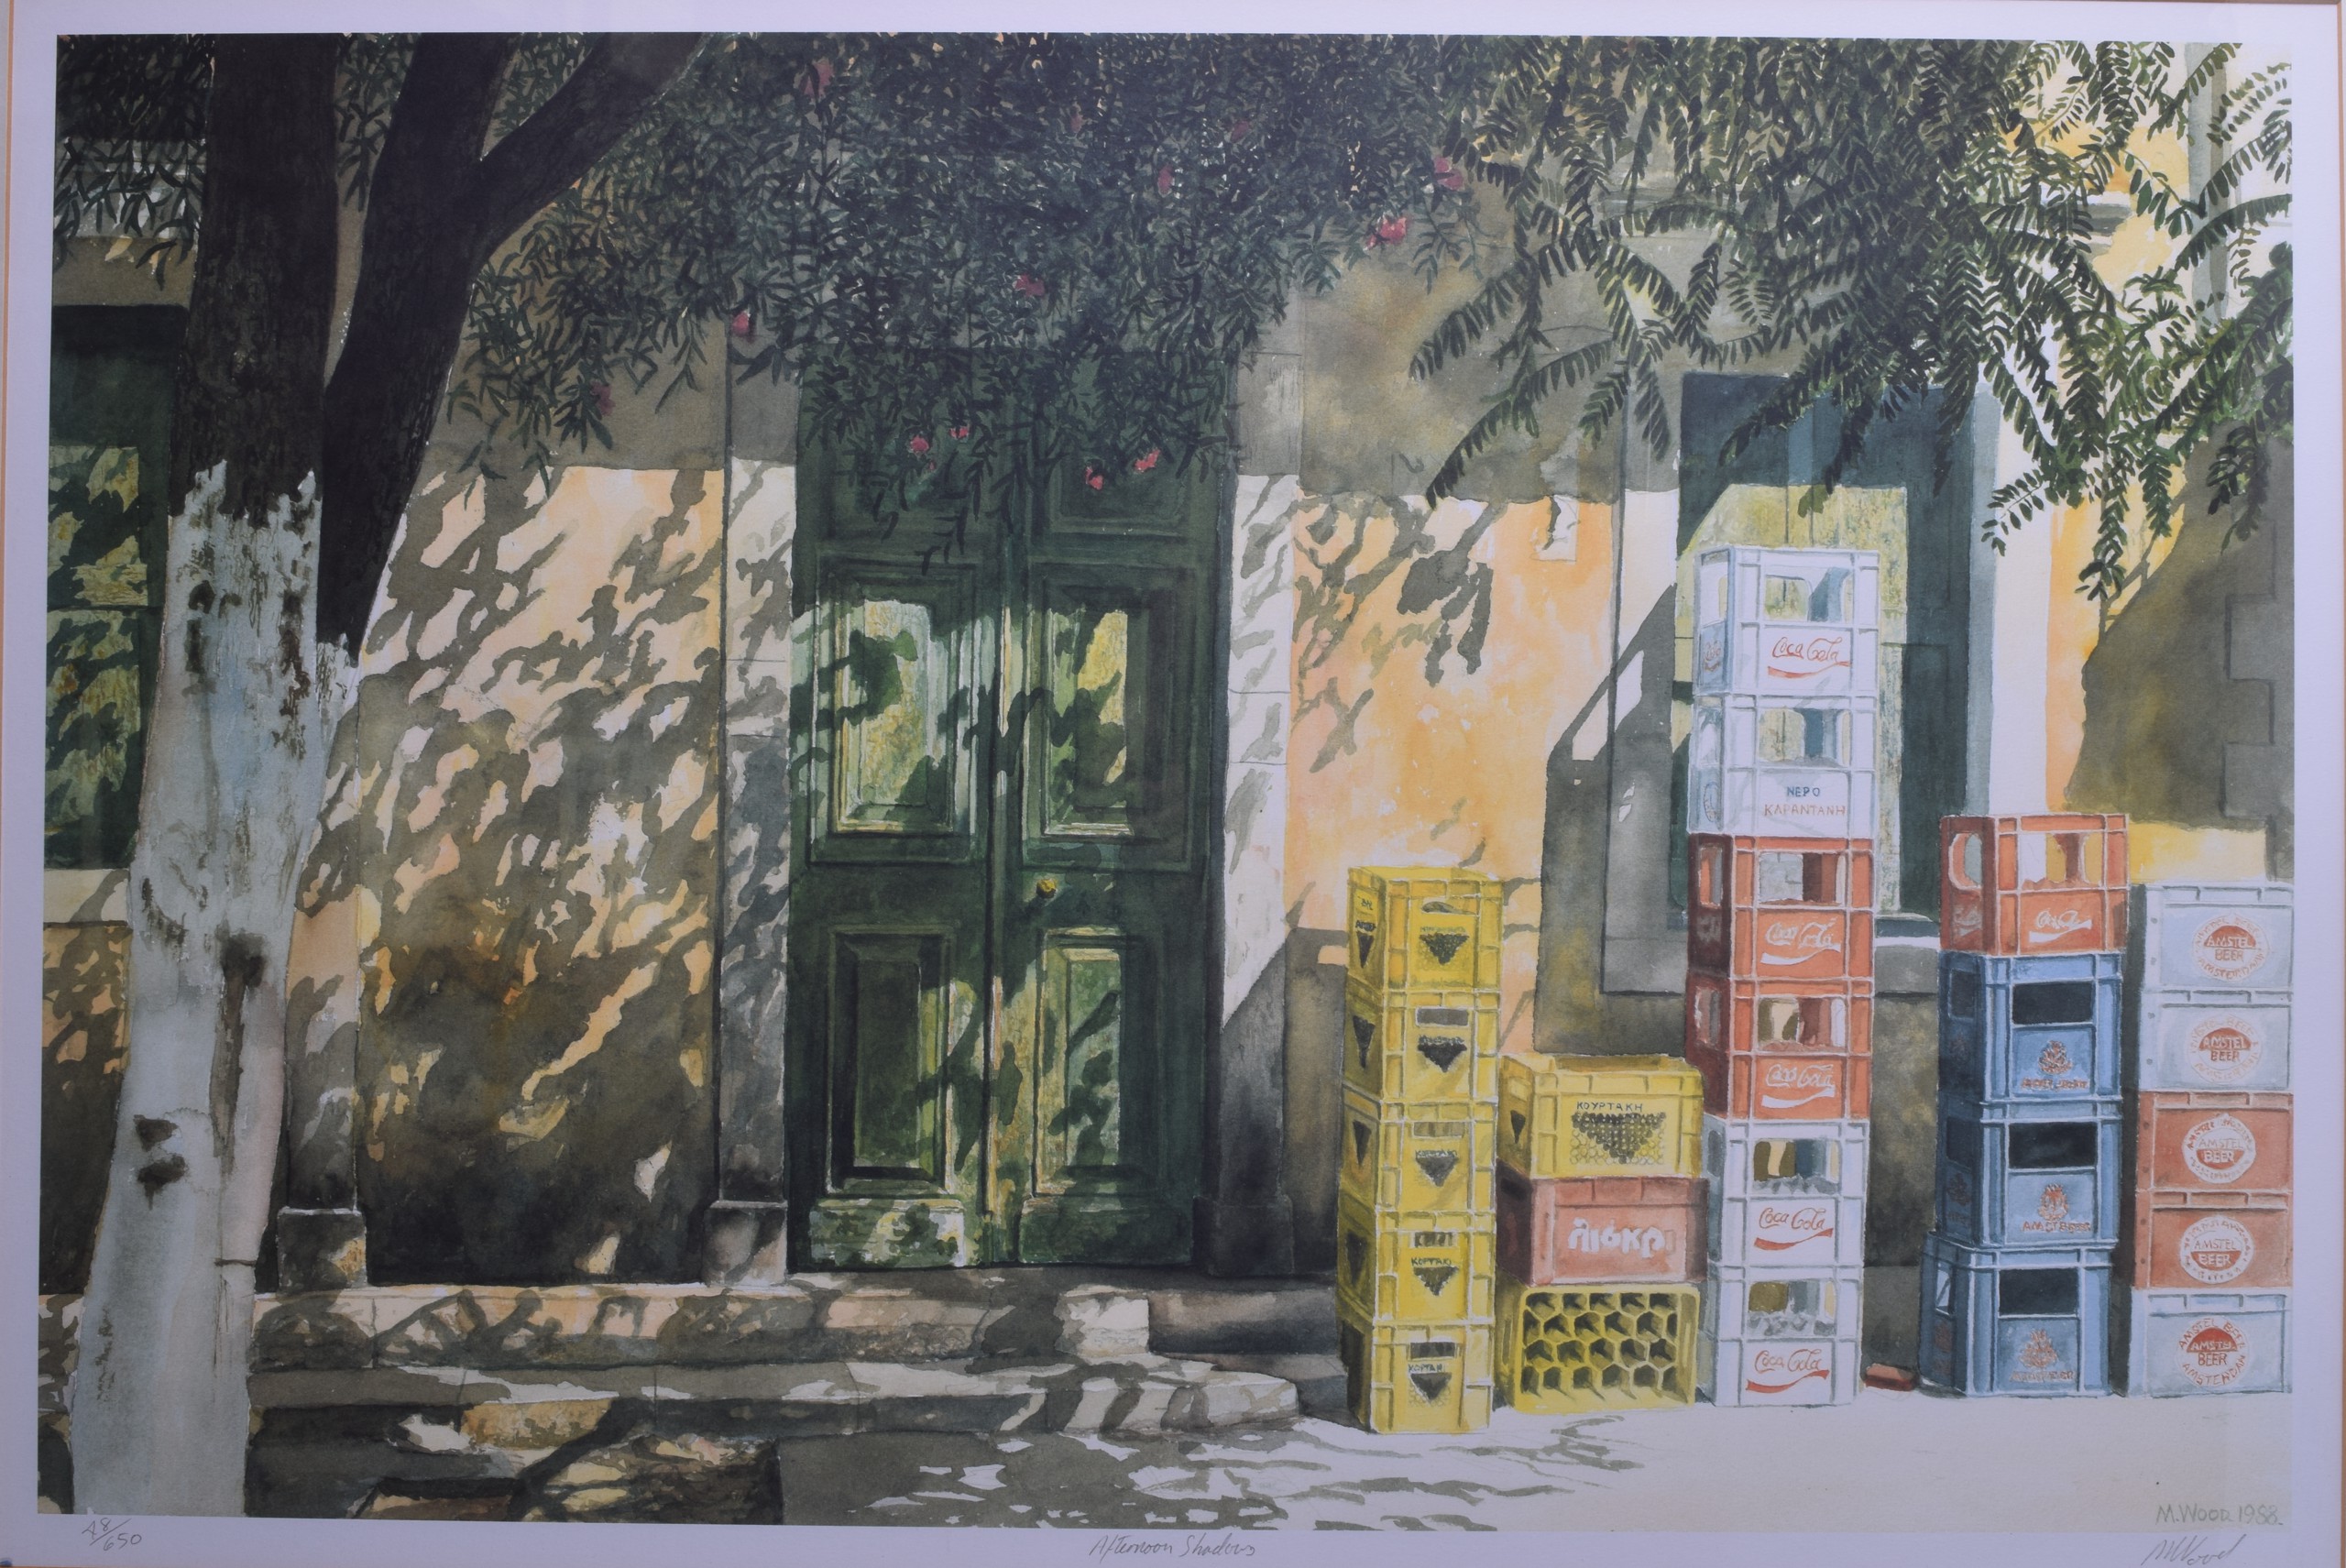 M WOOD, Framed Print, "Afternoon Shadows", a stack of empty bottle crates. 55 cm x 83 cm.